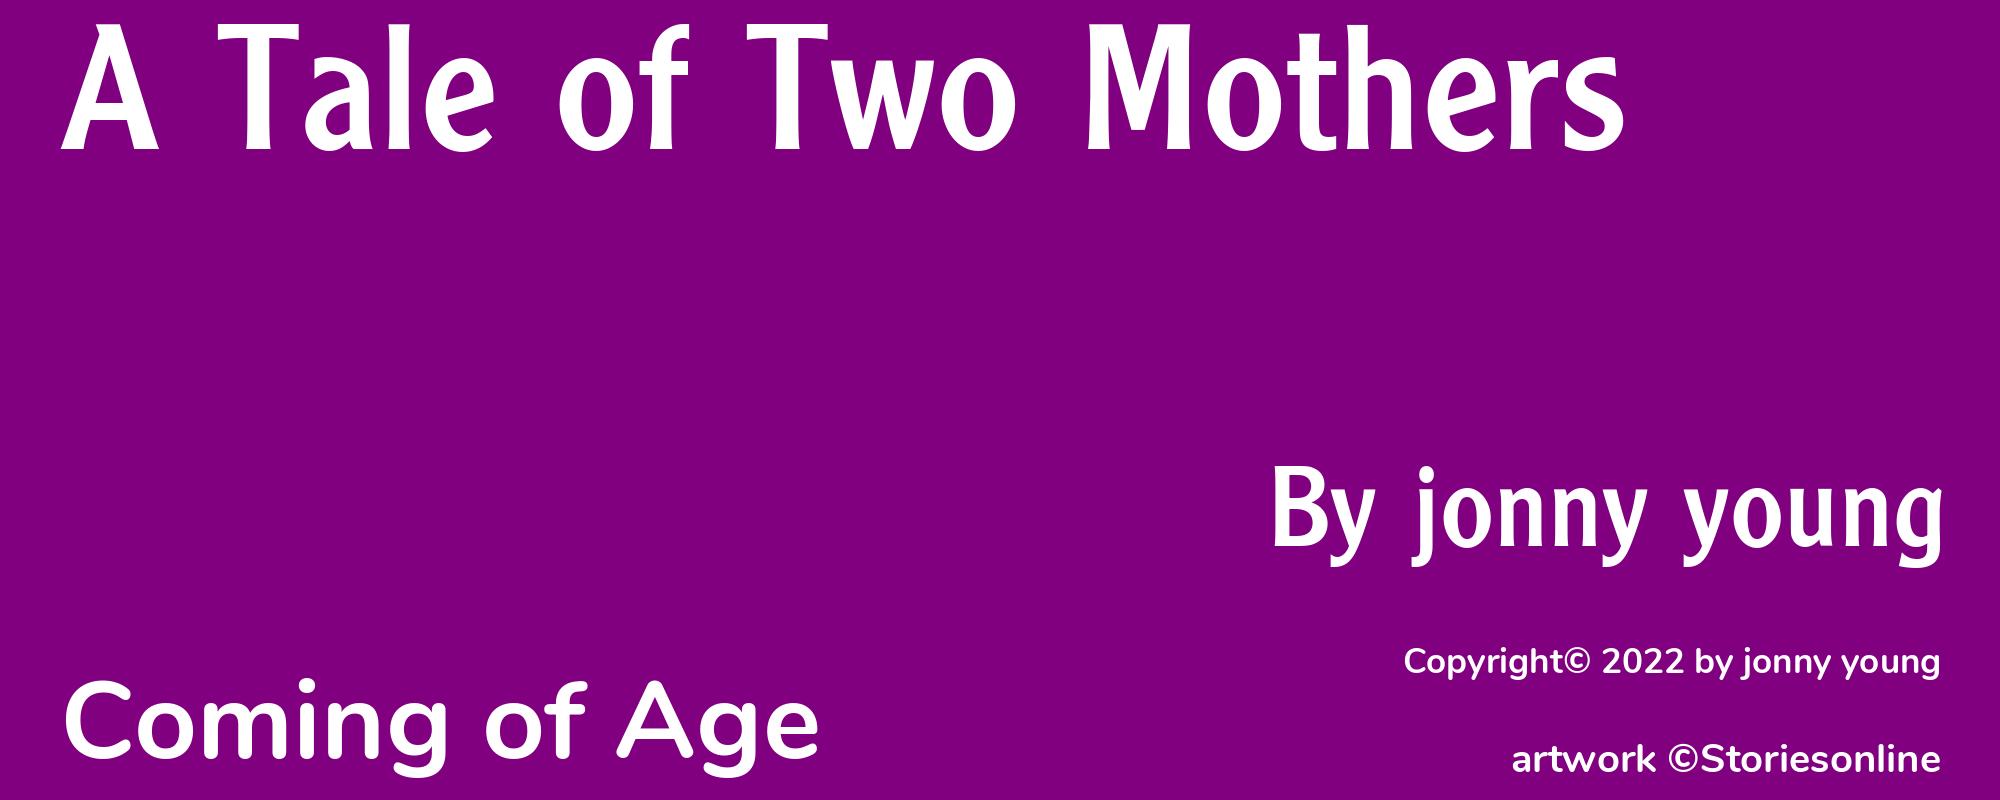 A Tale of Two Mothers - Cover